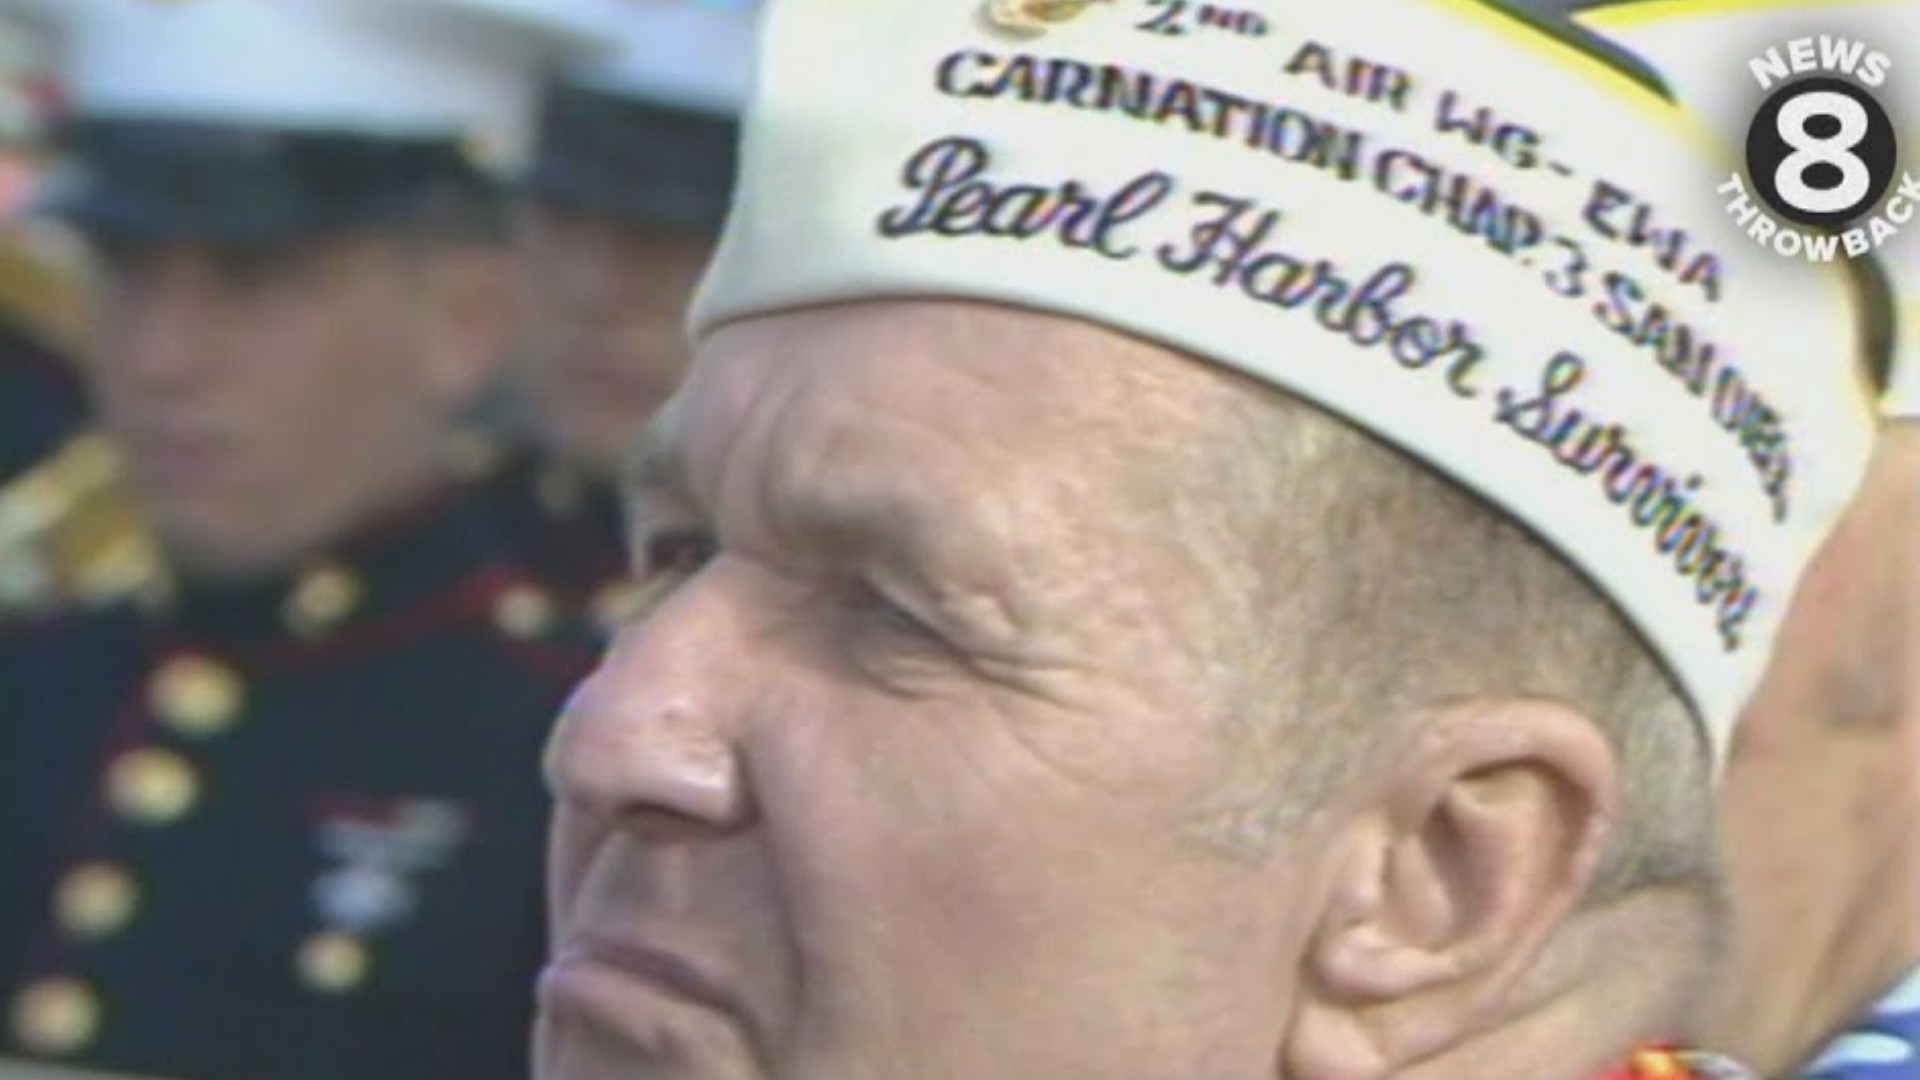 Each year, the remaining survivors from the attack on Pearl Harbor gather to remember those lost. This is that service in 1985 in San Diego, CA.